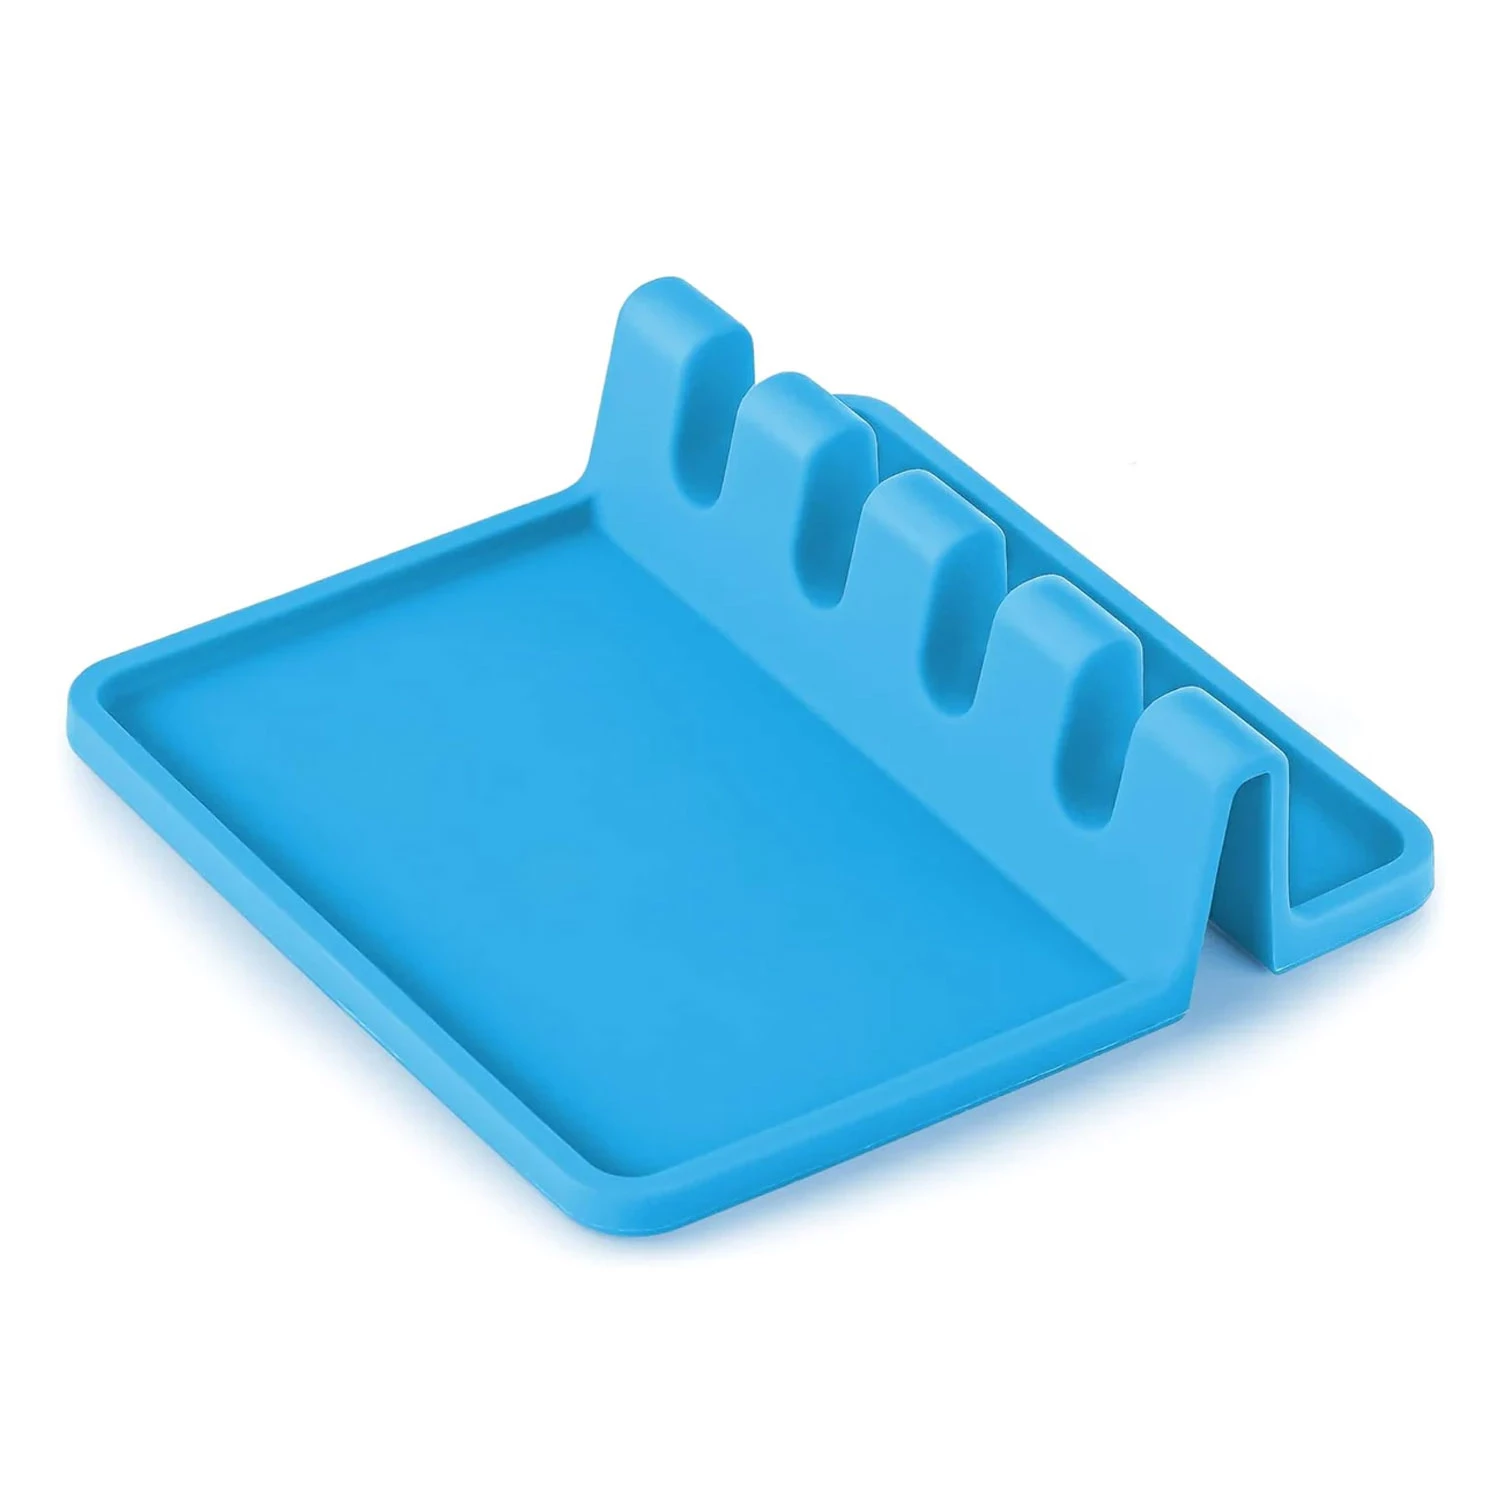 Simple Craft Heat Resistant Silicone Spoon Rest With Drip Pad